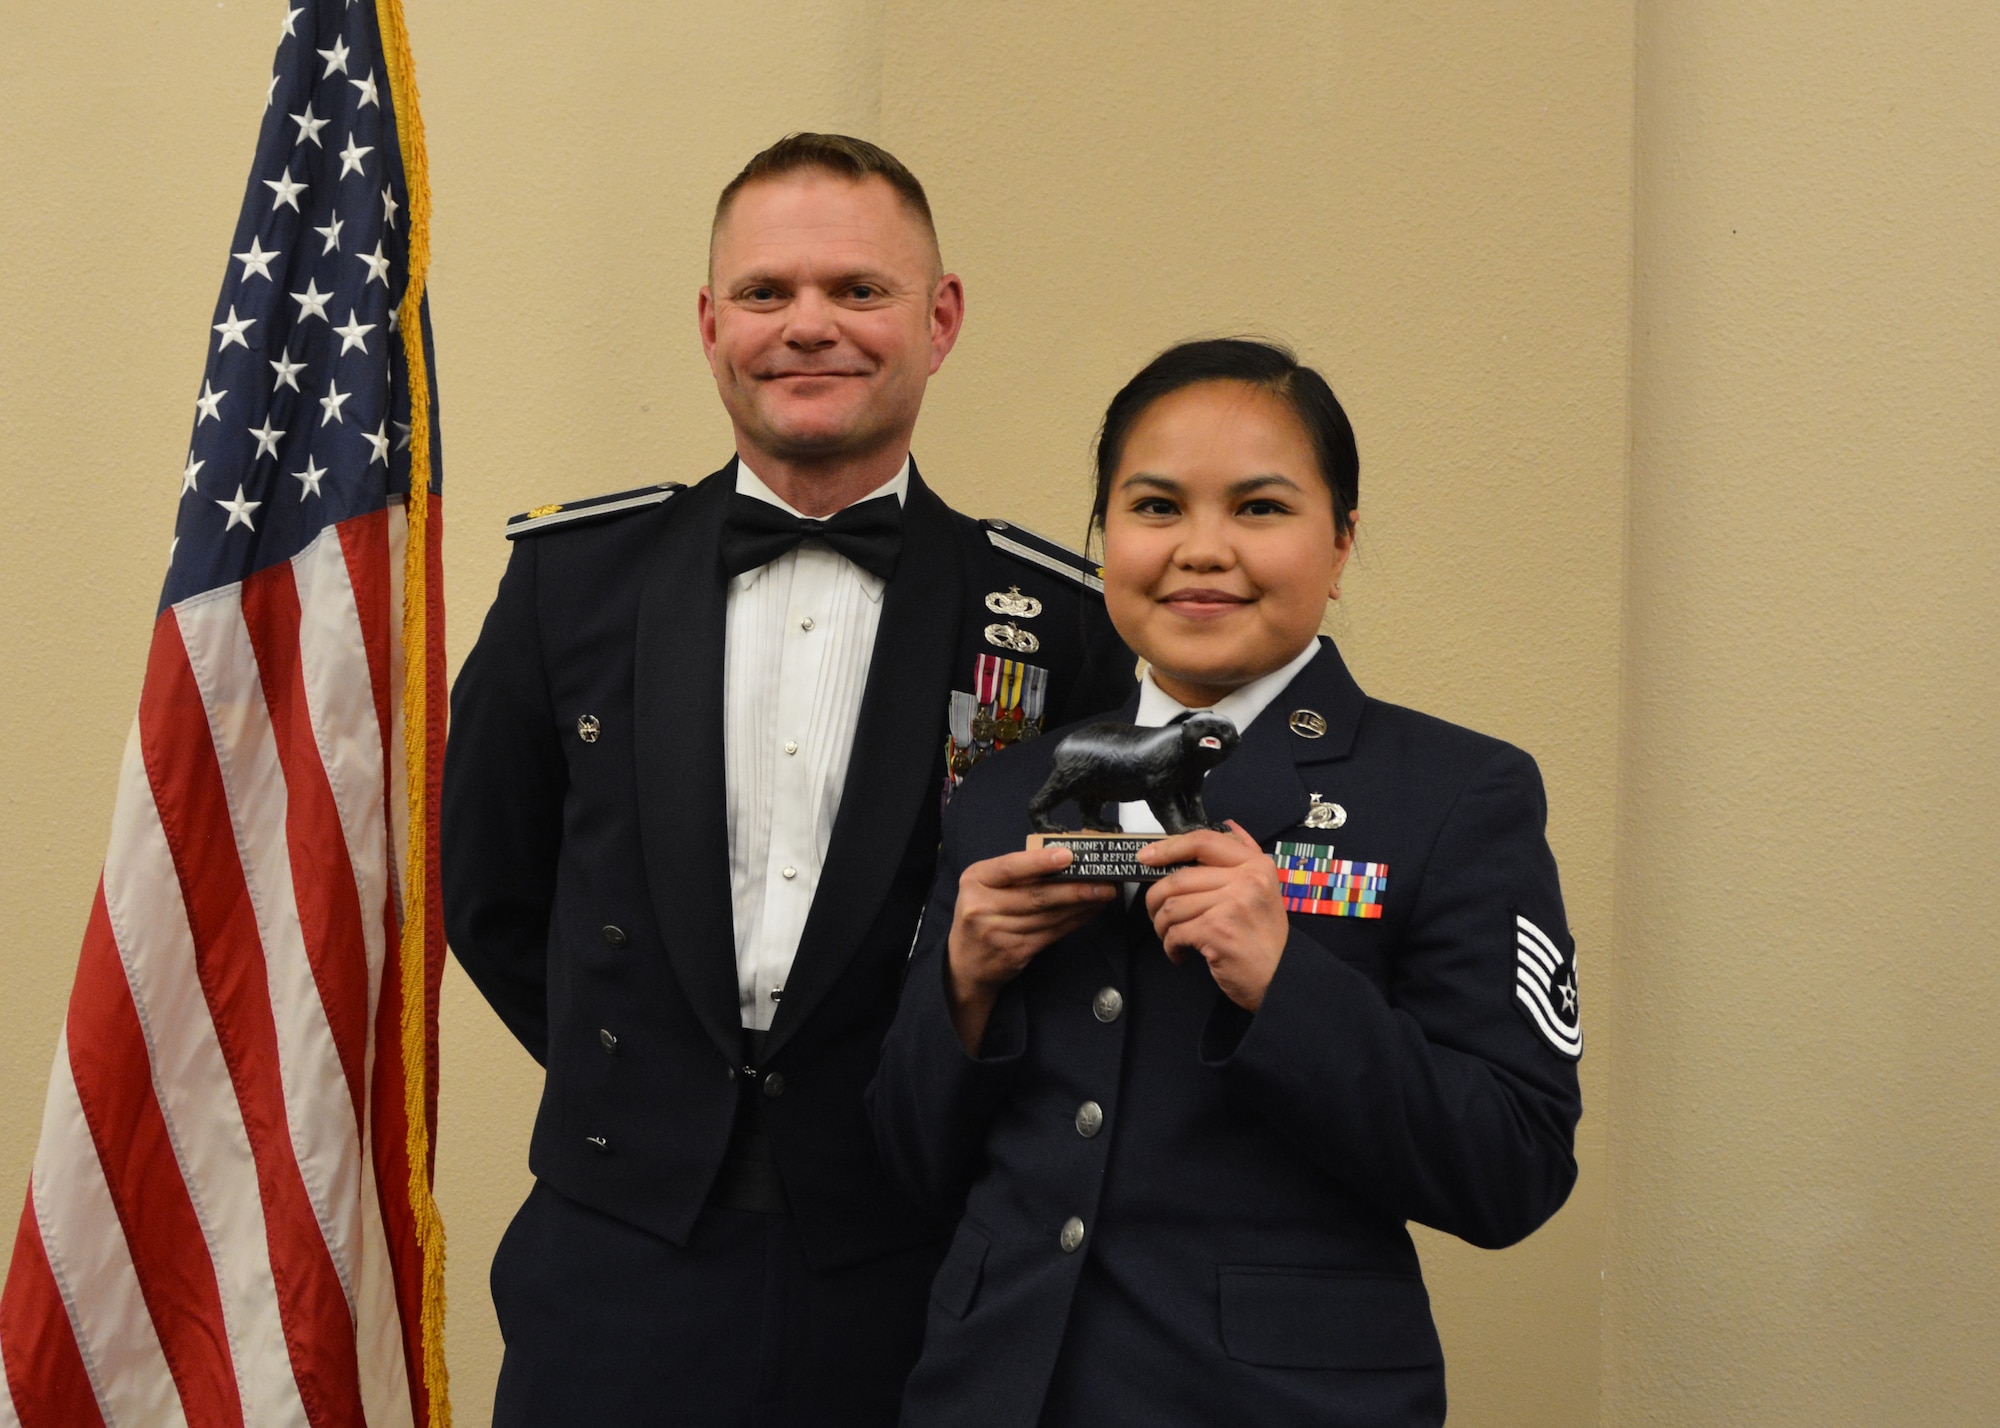 Maj. Patrick Mitchell, 507th Air Refueling Wing executive officer, presents the 2018 507th ARW Wing Staff Honey Badger Trophy for outstanding performance to Tech. Sgt. Audreann Wallace March 2, 2019, in Midwest City, Oklahoma. (U.S. Air Force photo by Maj. Jon Quinlan)